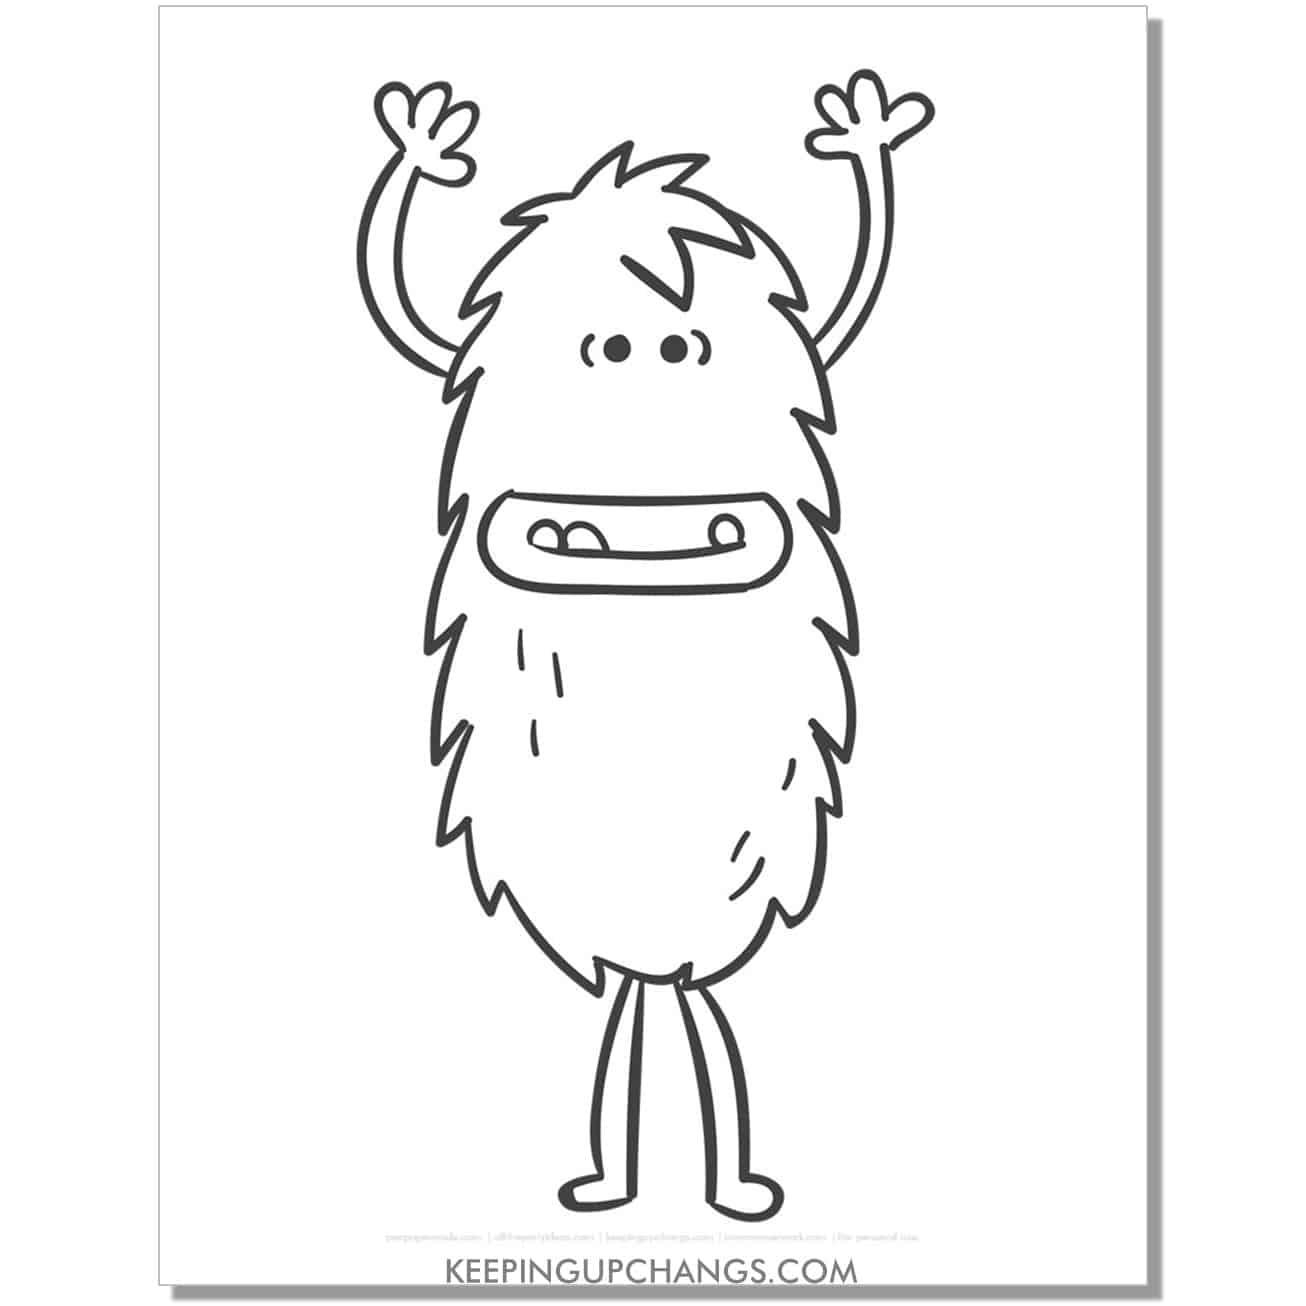 free long, skinny furry monster coloring page.